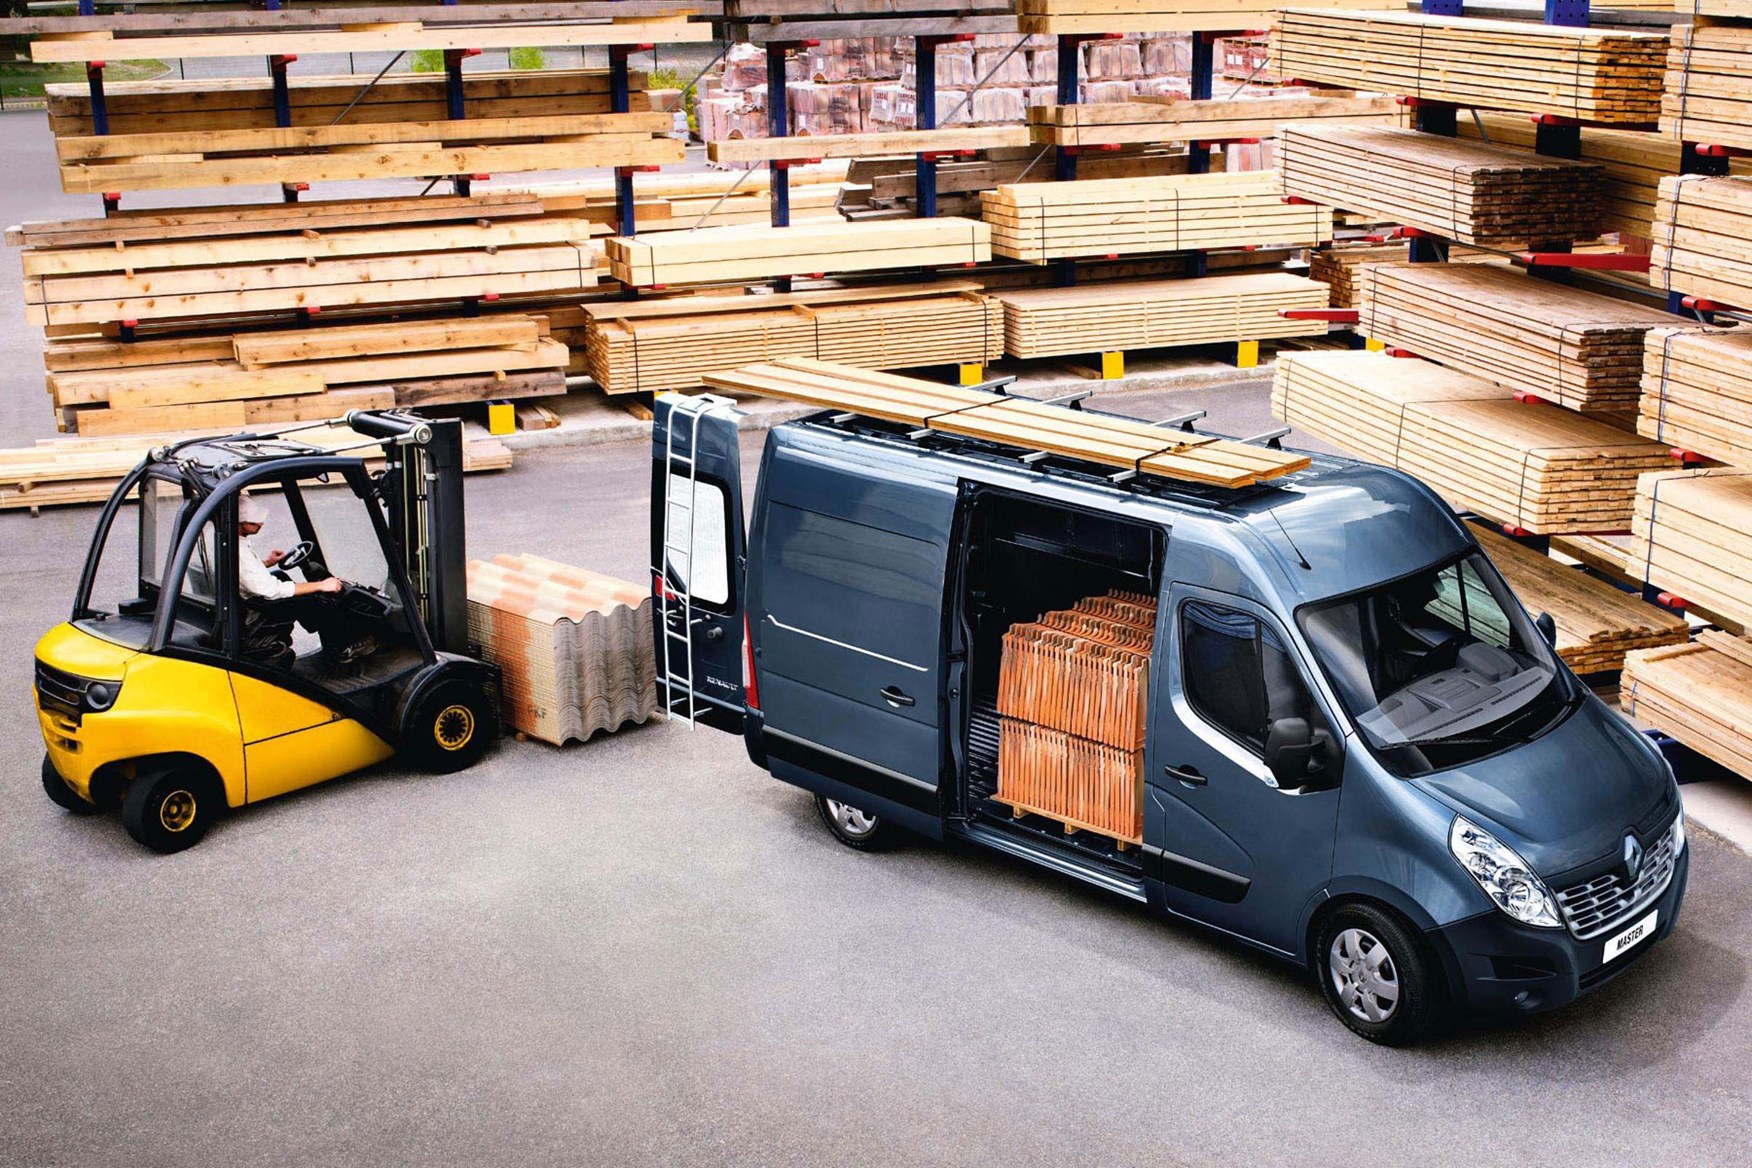 Renault Master load area, dimensions, payload - pre-2019 model, being loaded by forklift